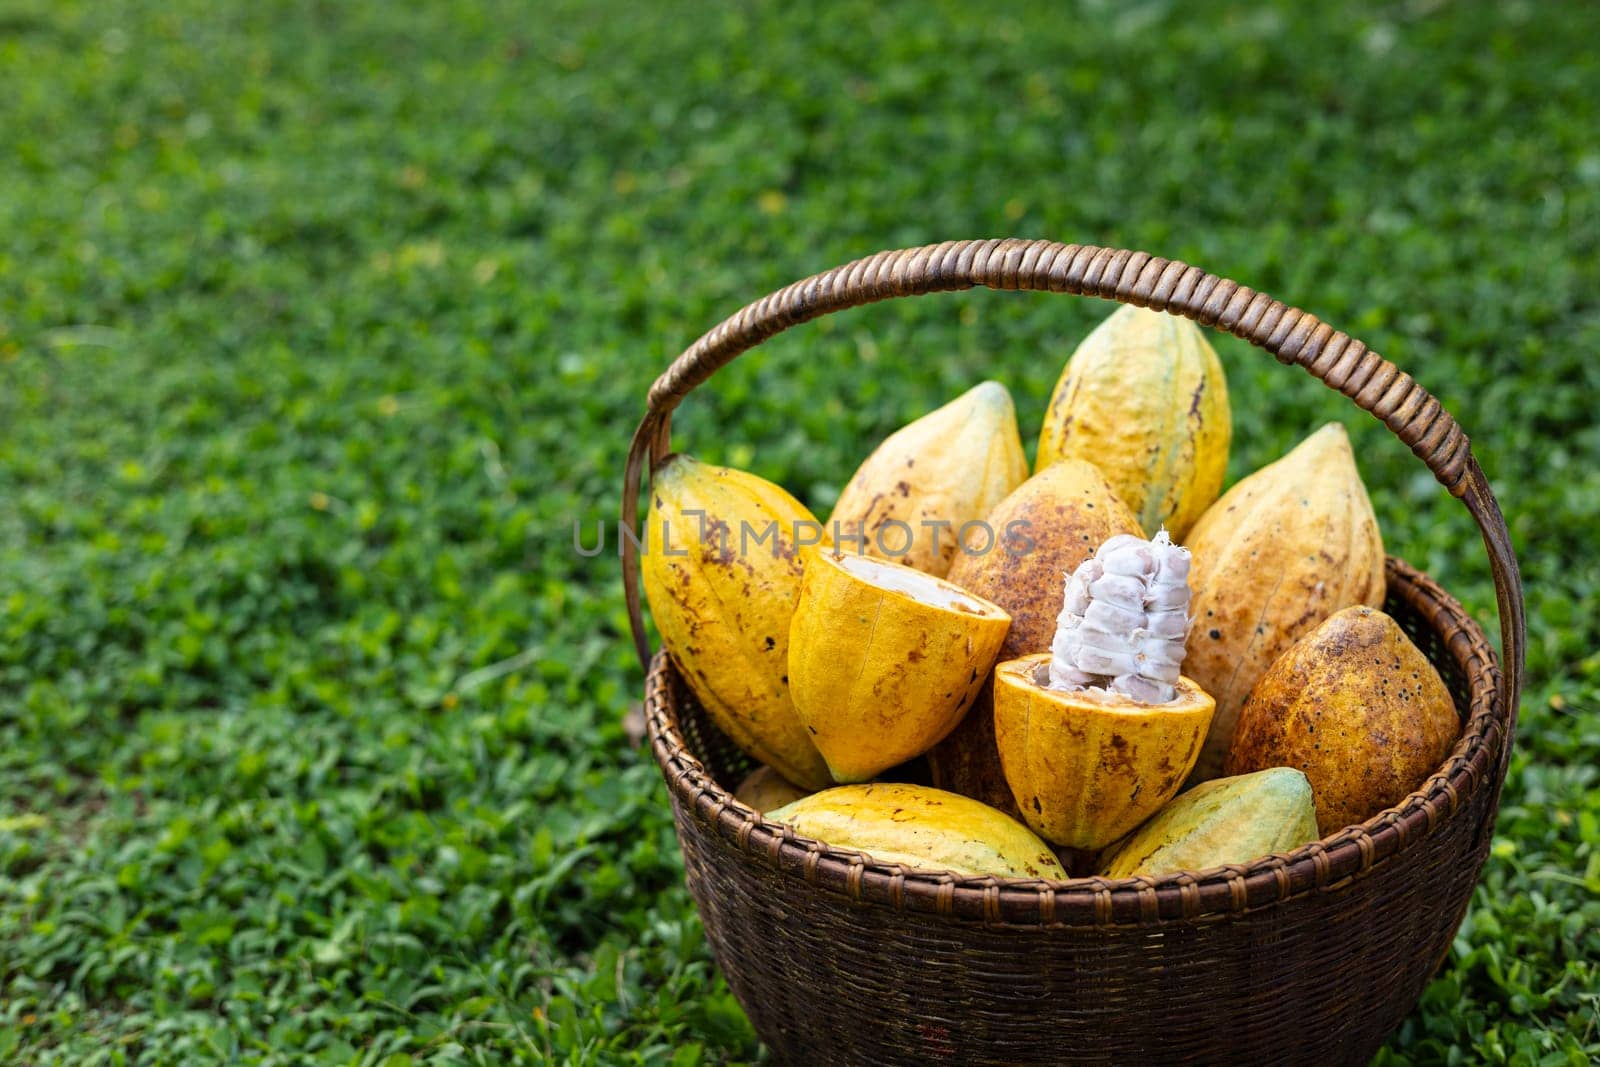 Ripe Cacao Fruit In The Basket by urzine